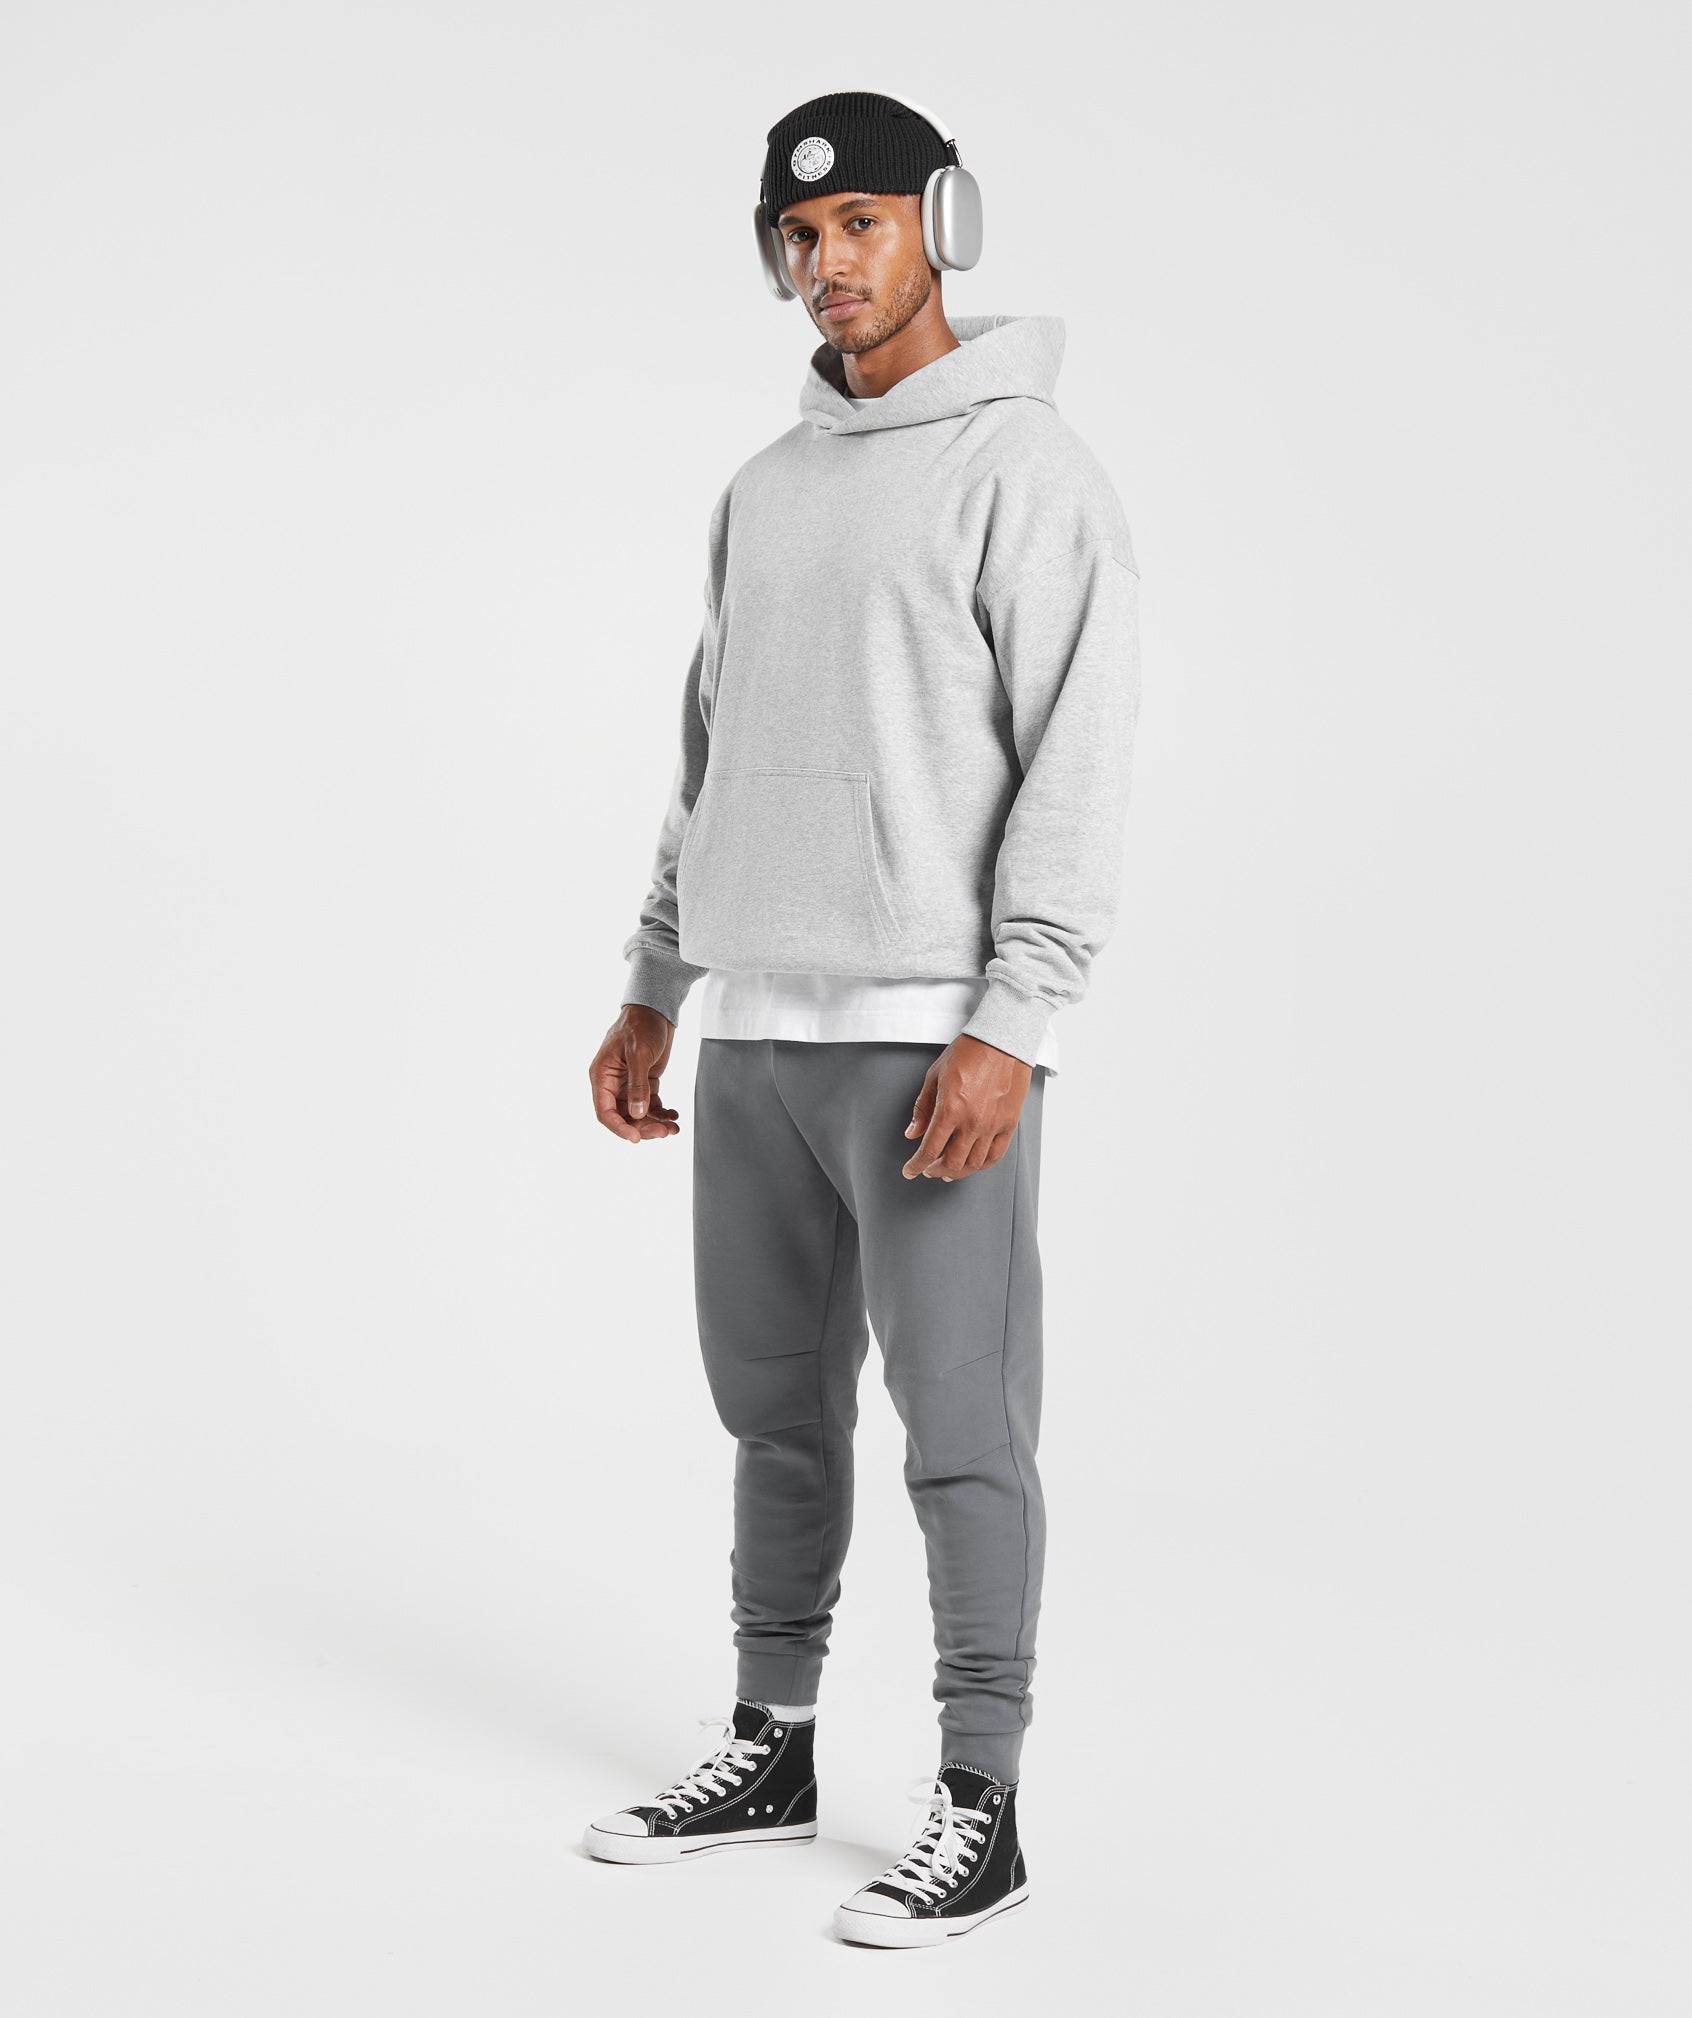 Gymshark rest day jogger and sweatshirt? : r/gymsnark